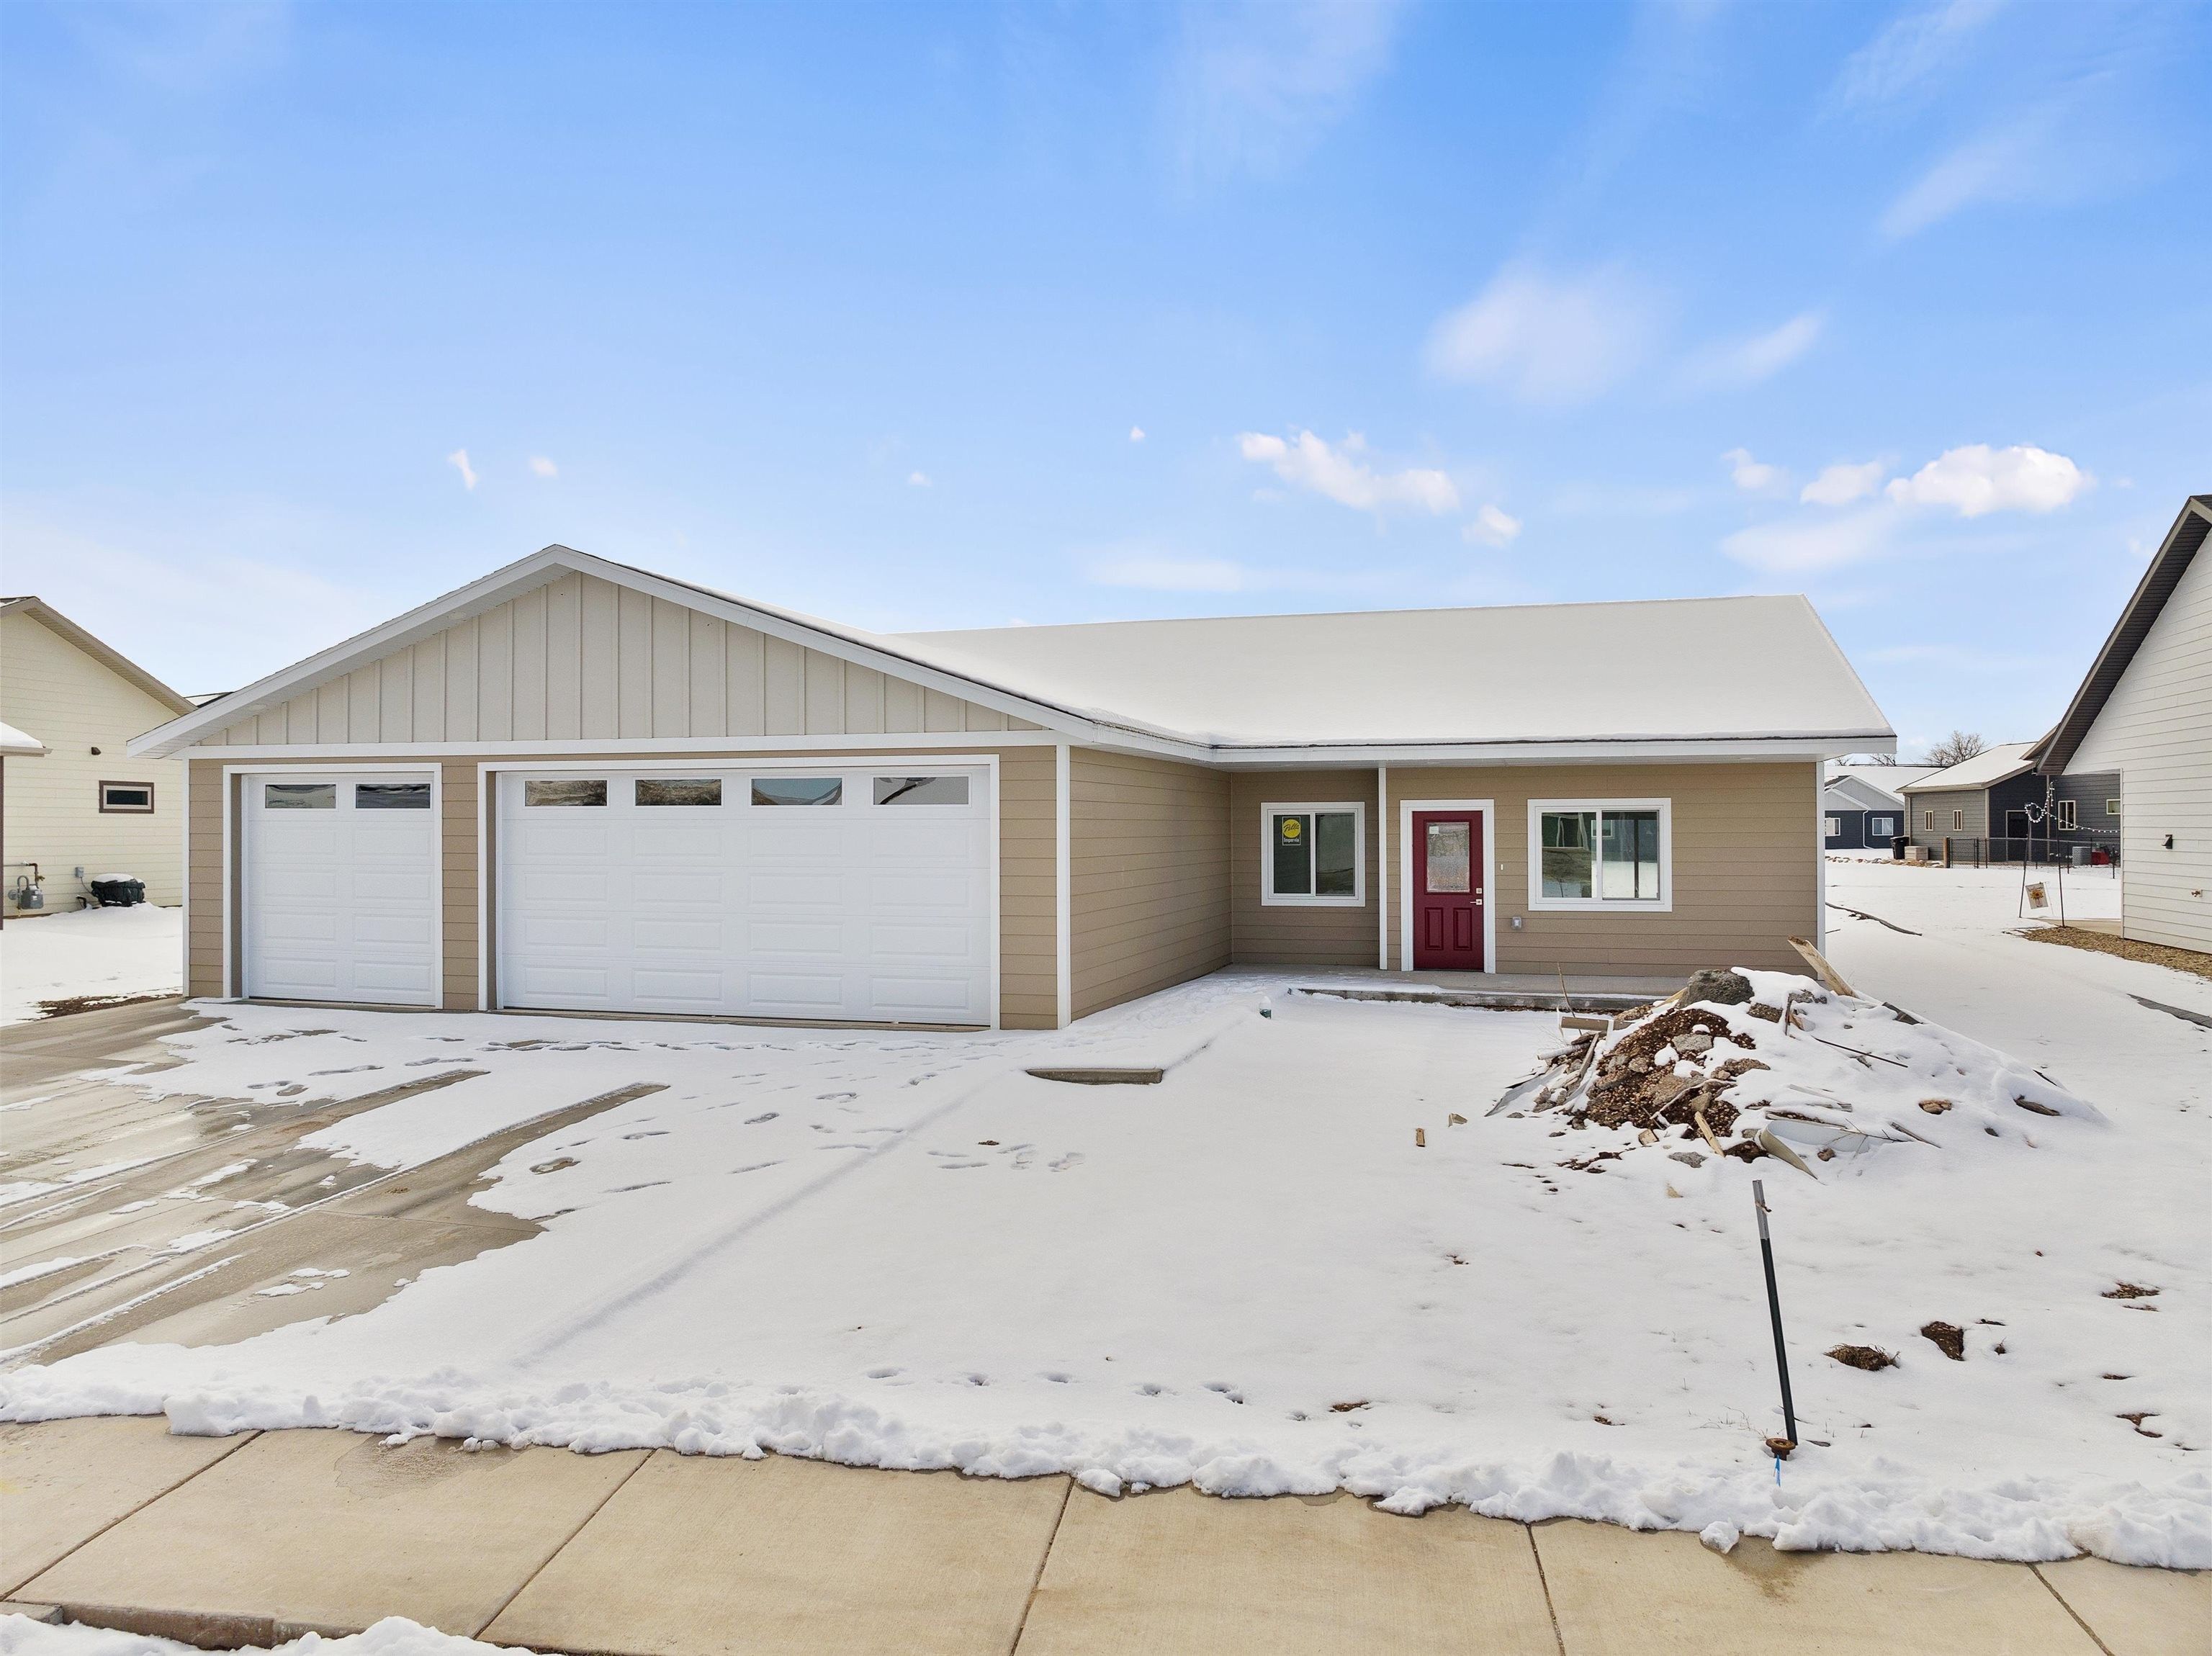 3915 Powder River Ave. Spearfish, SD 57783